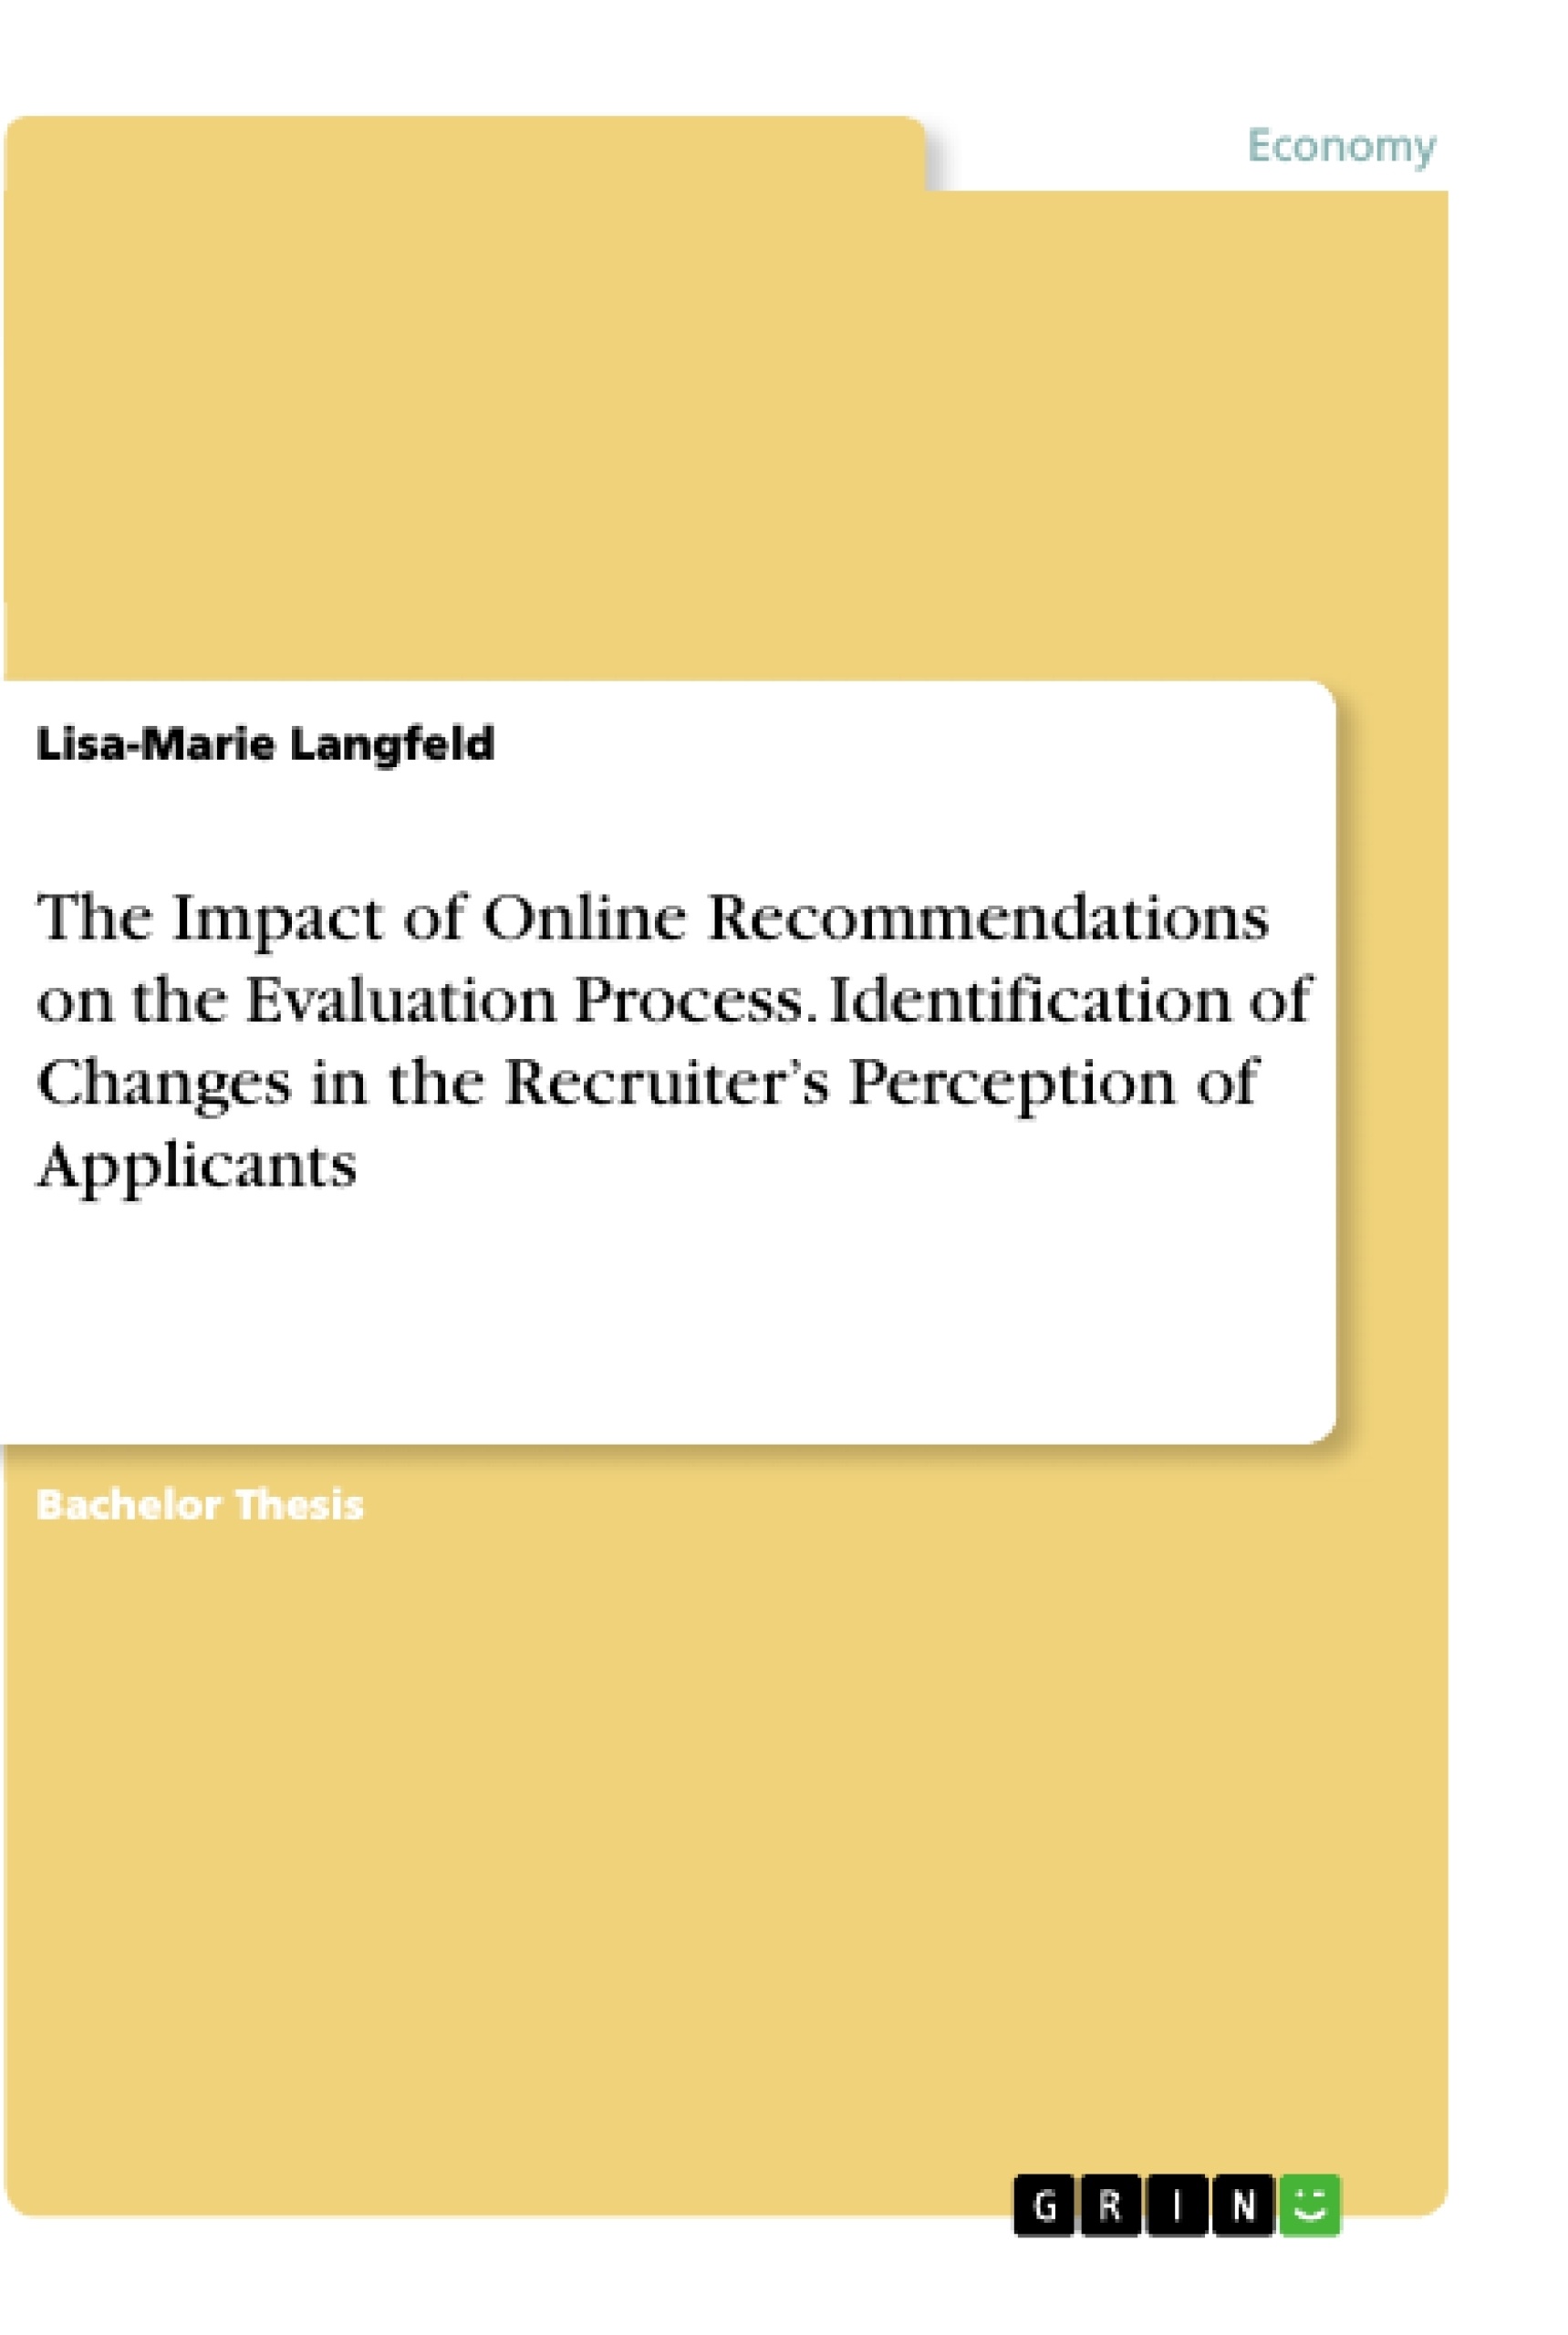 Title: The Impact of Online Recommendations on the Evaluation Process. Identification of Changes in the Recruiter’s Perception of Applicants